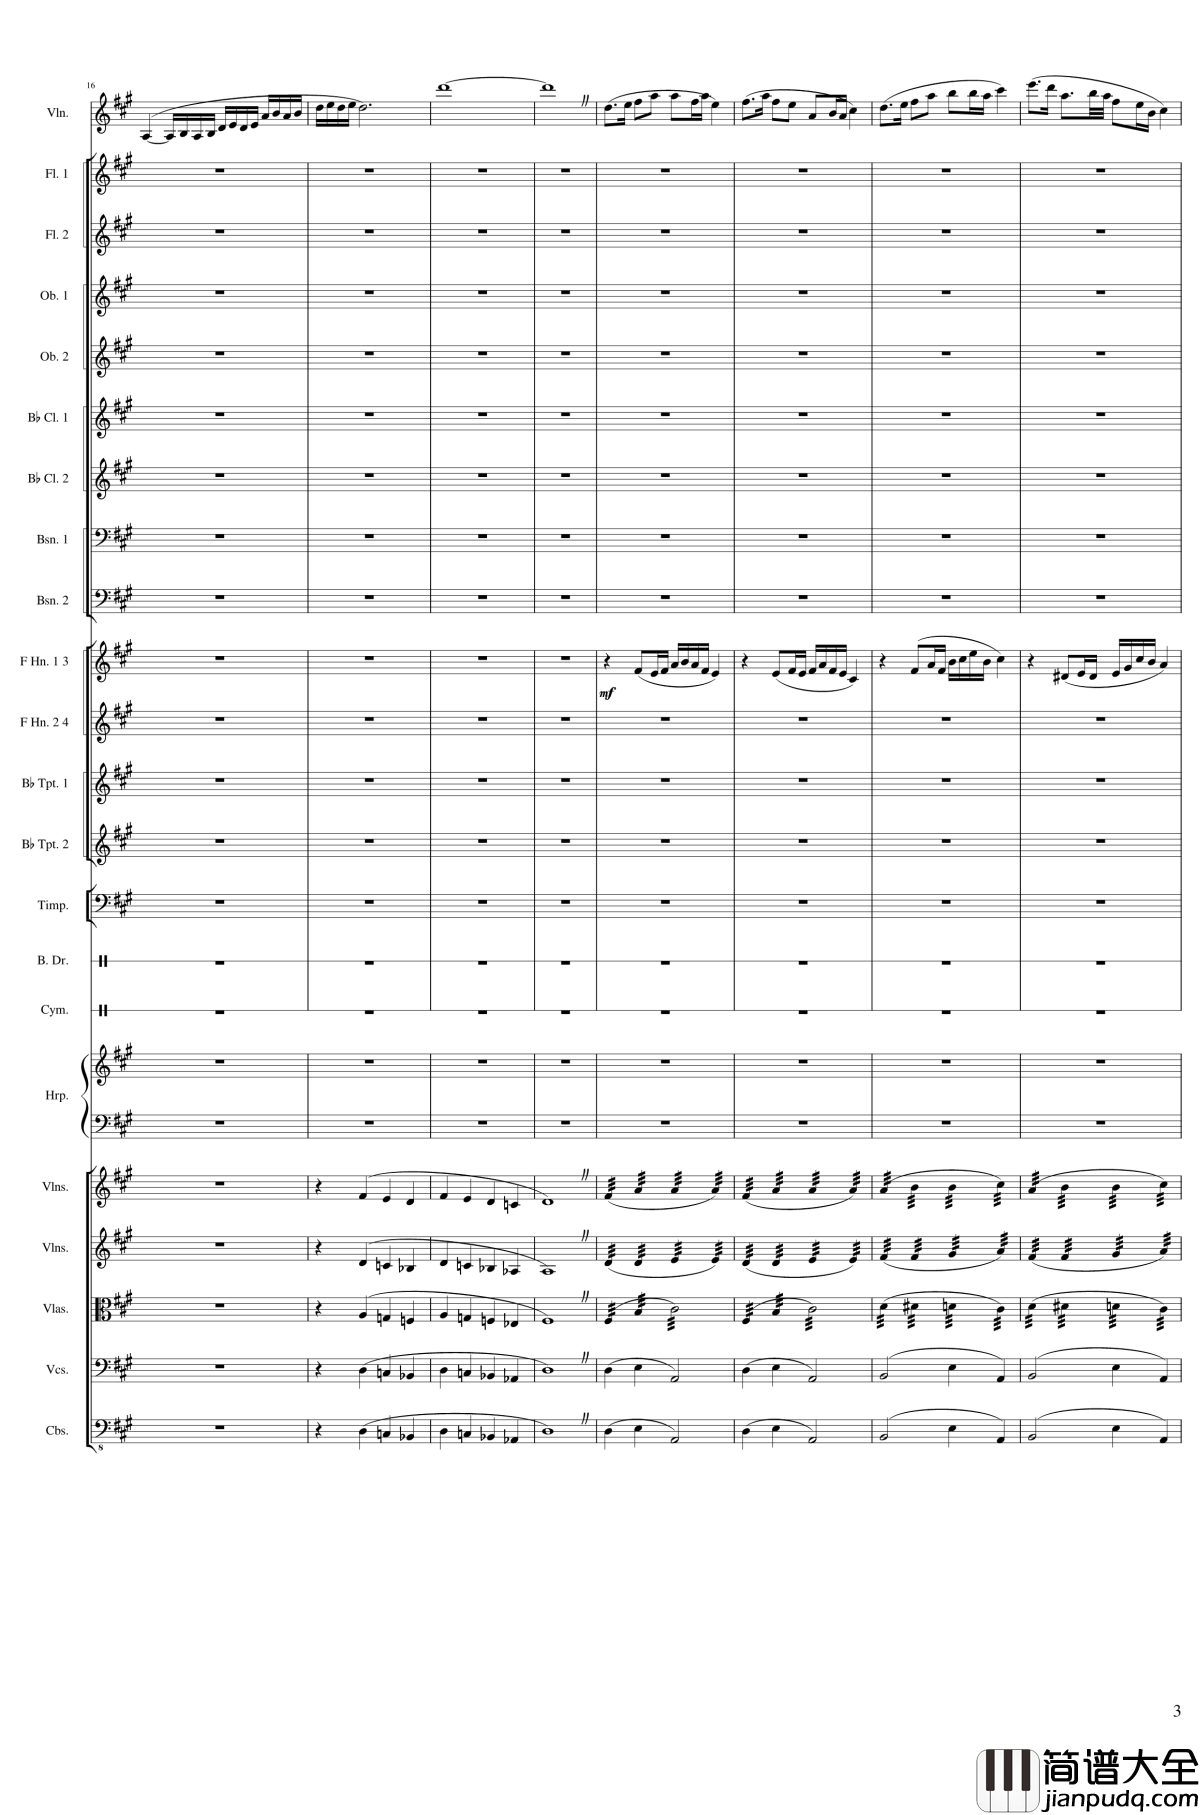 Capricorn_Concerto_for_Violin_and_Orchestra,_Op.114钢琴谱_一个球